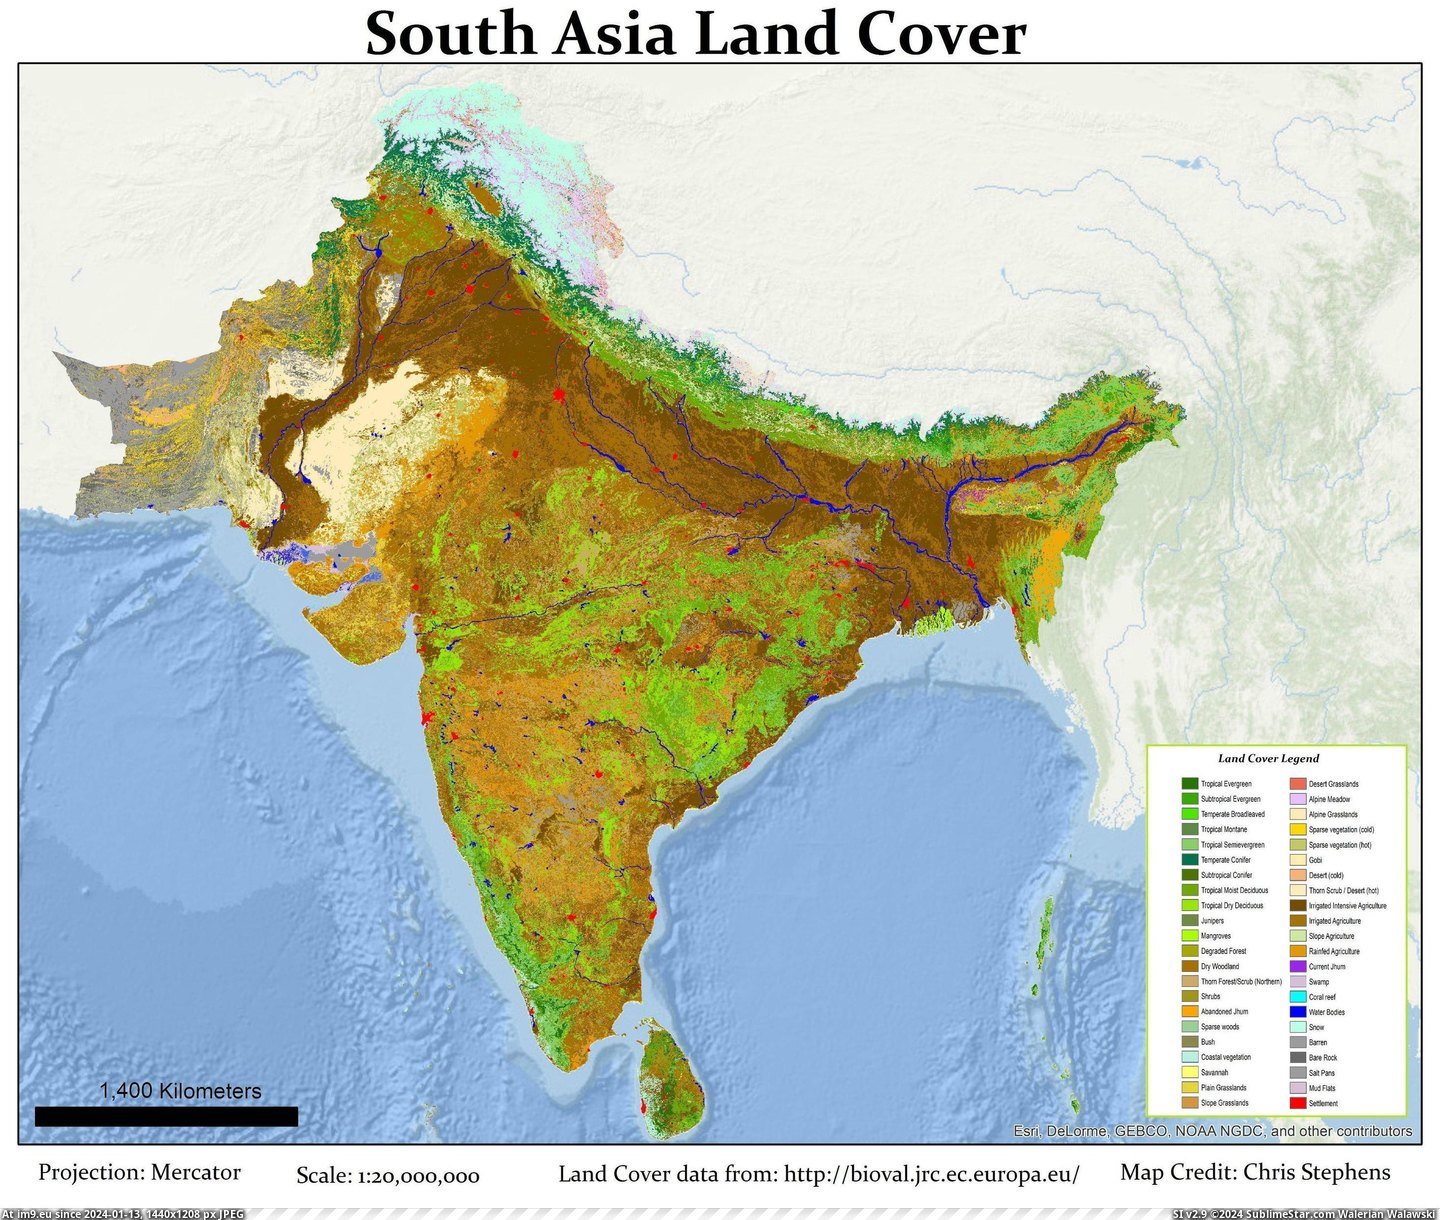 #South #Asia #Land #Cover [Mapporn] South Asia Land Cover [2930x2469] Pic. (Изображение из альбом My r/MAPS favs))